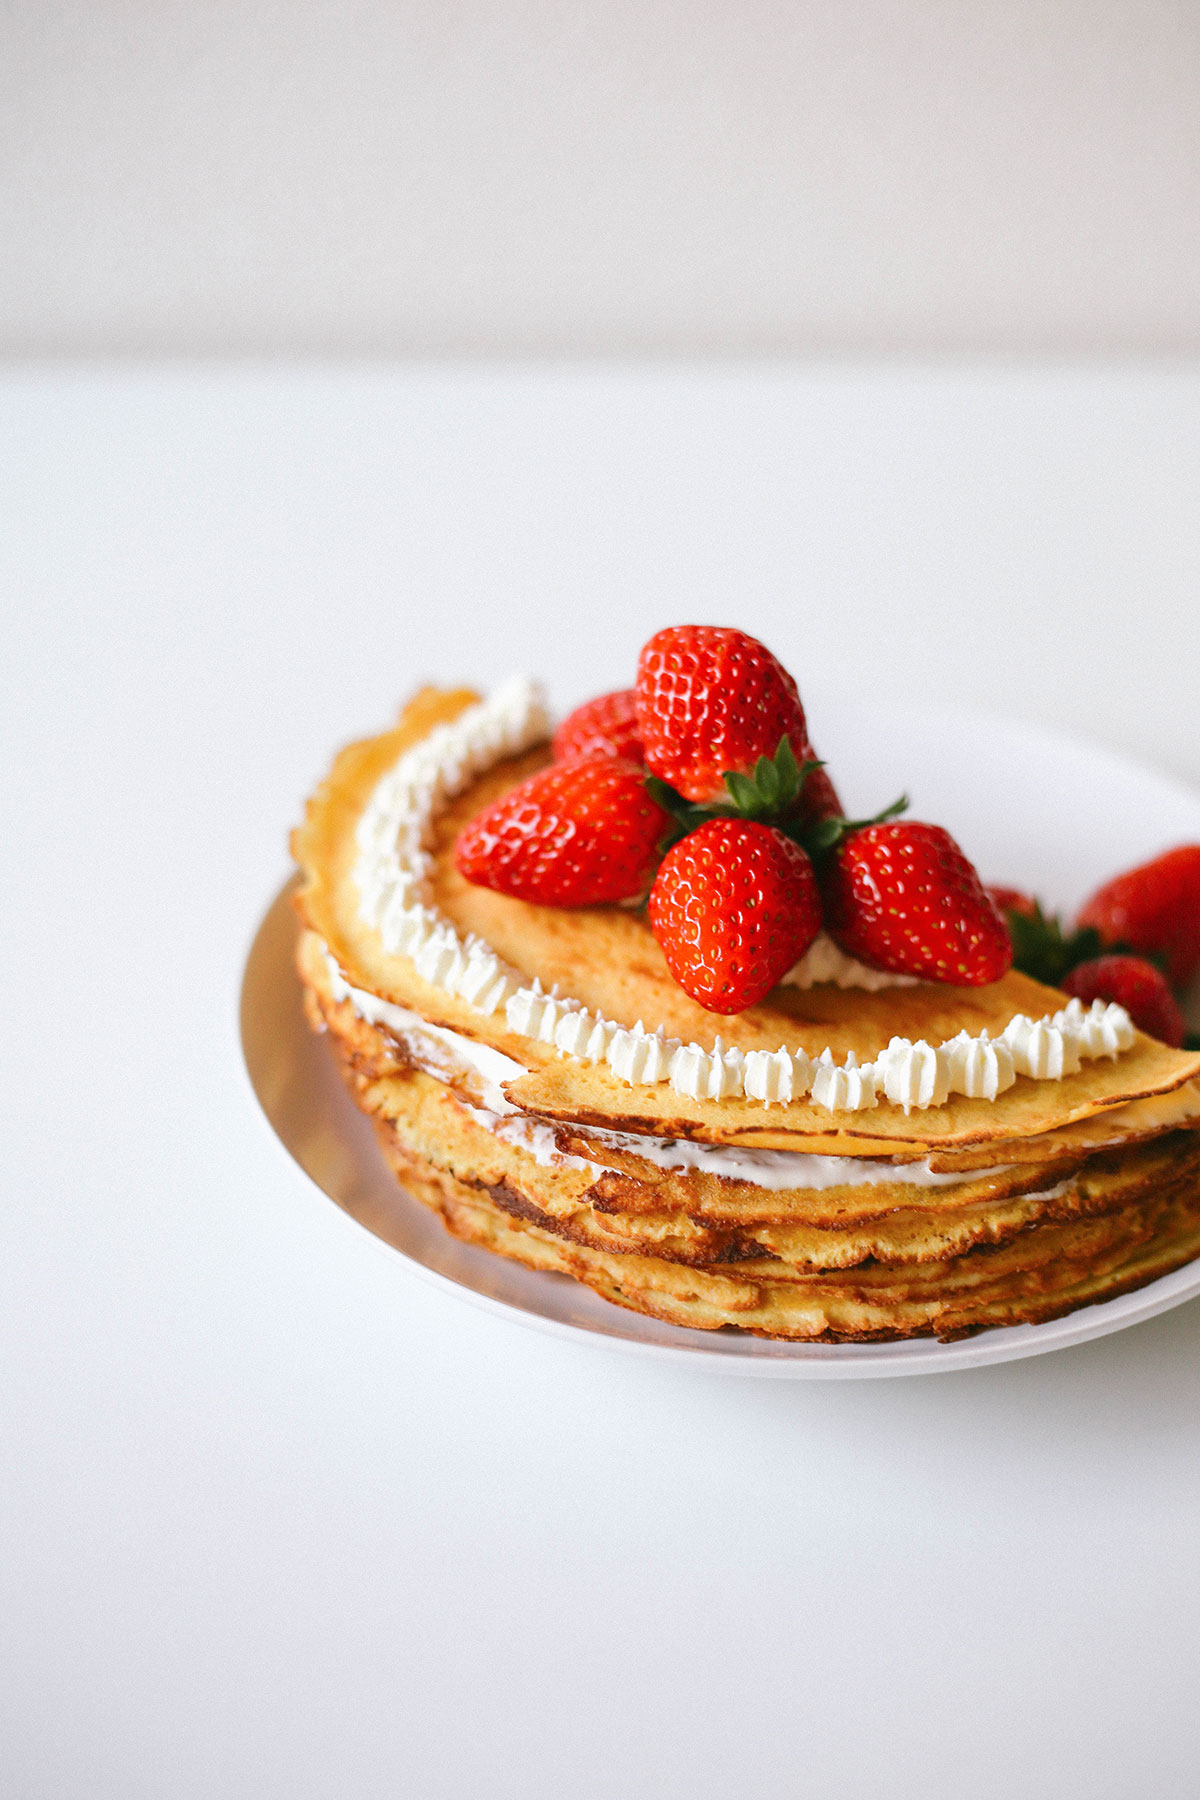 Keto crepe cake for low carb. Easy mille crepe recipe served with strawberries.